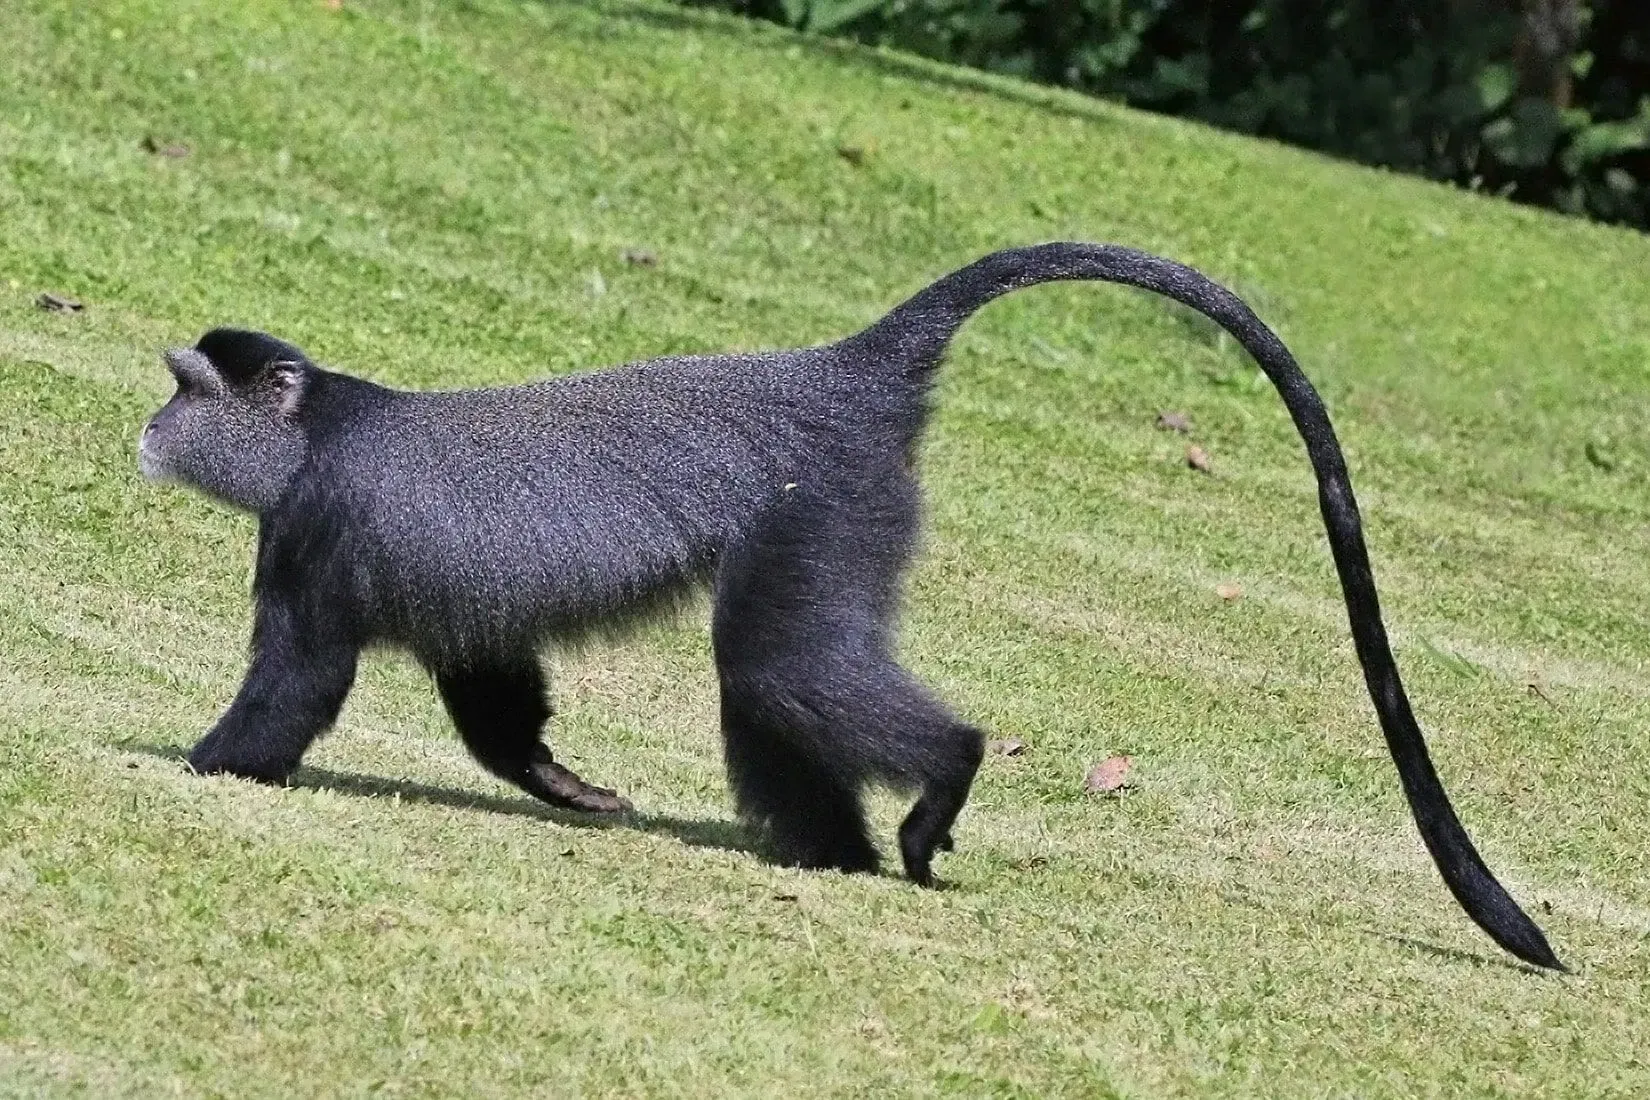 Read more about the amazing primate Blue Monkey in this article.